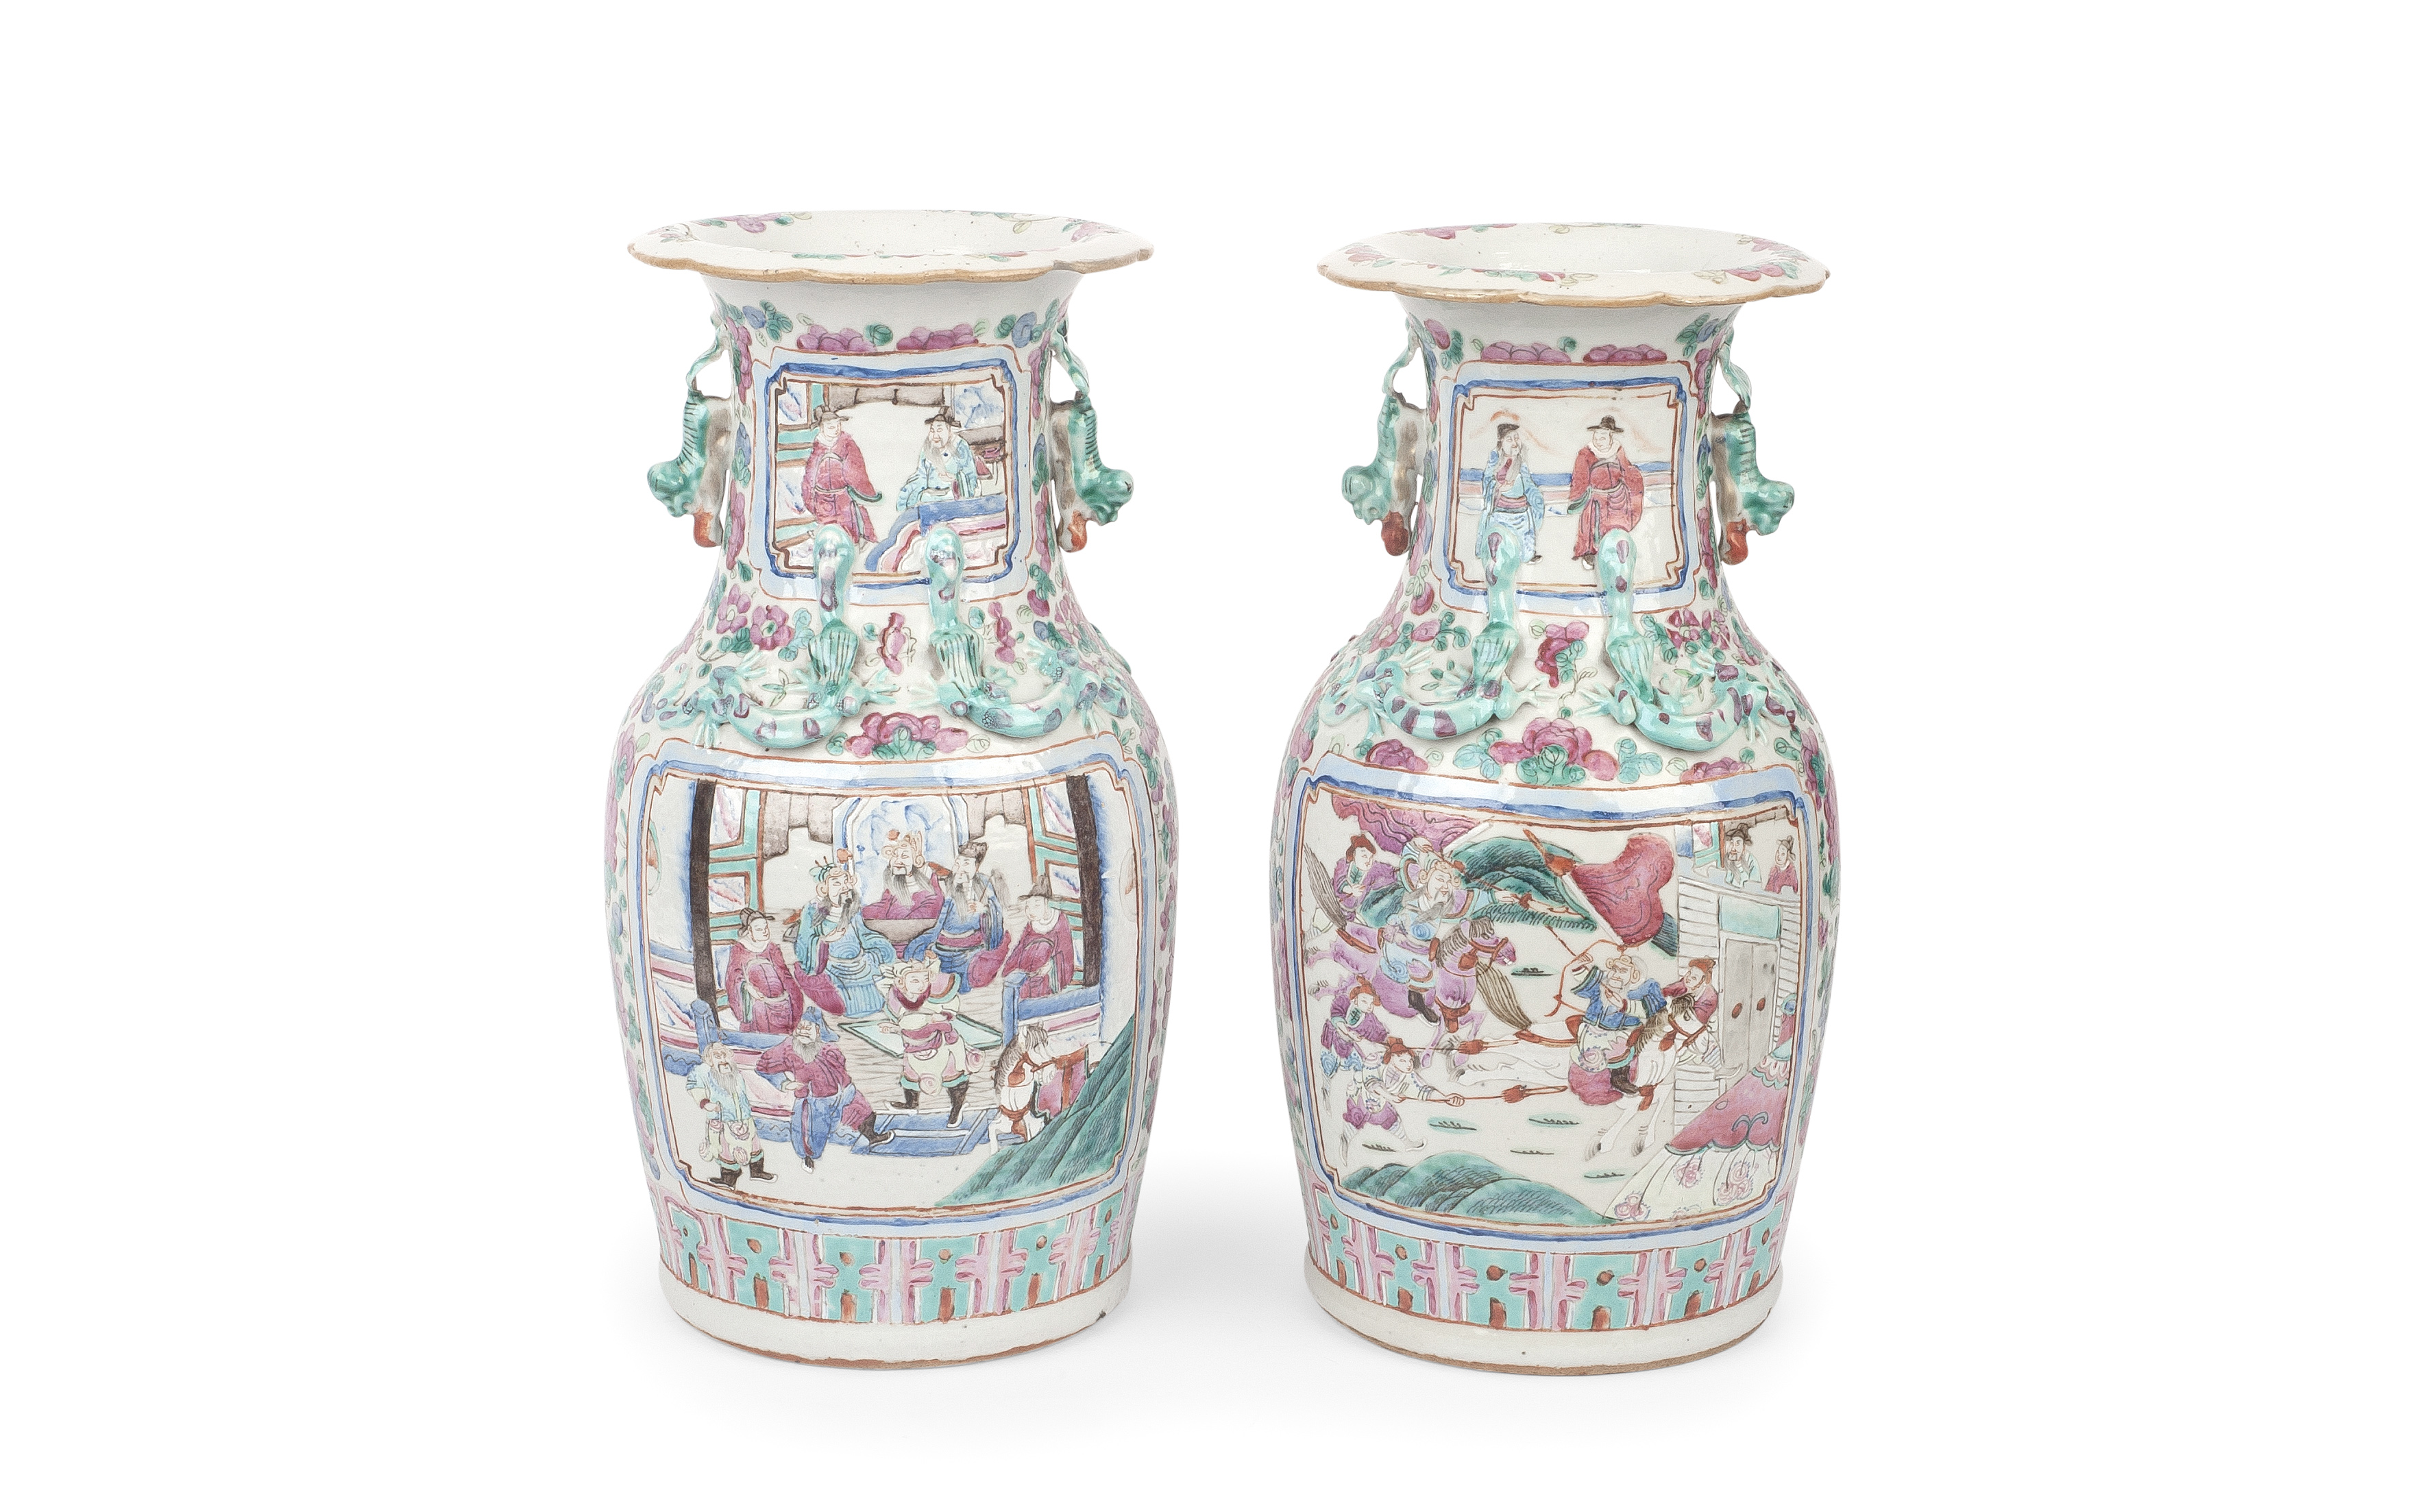 A PAIR OF 19TH CENTURY CHINESE PORCELAIN 'CANTON' FAMILLE ROSE VASES